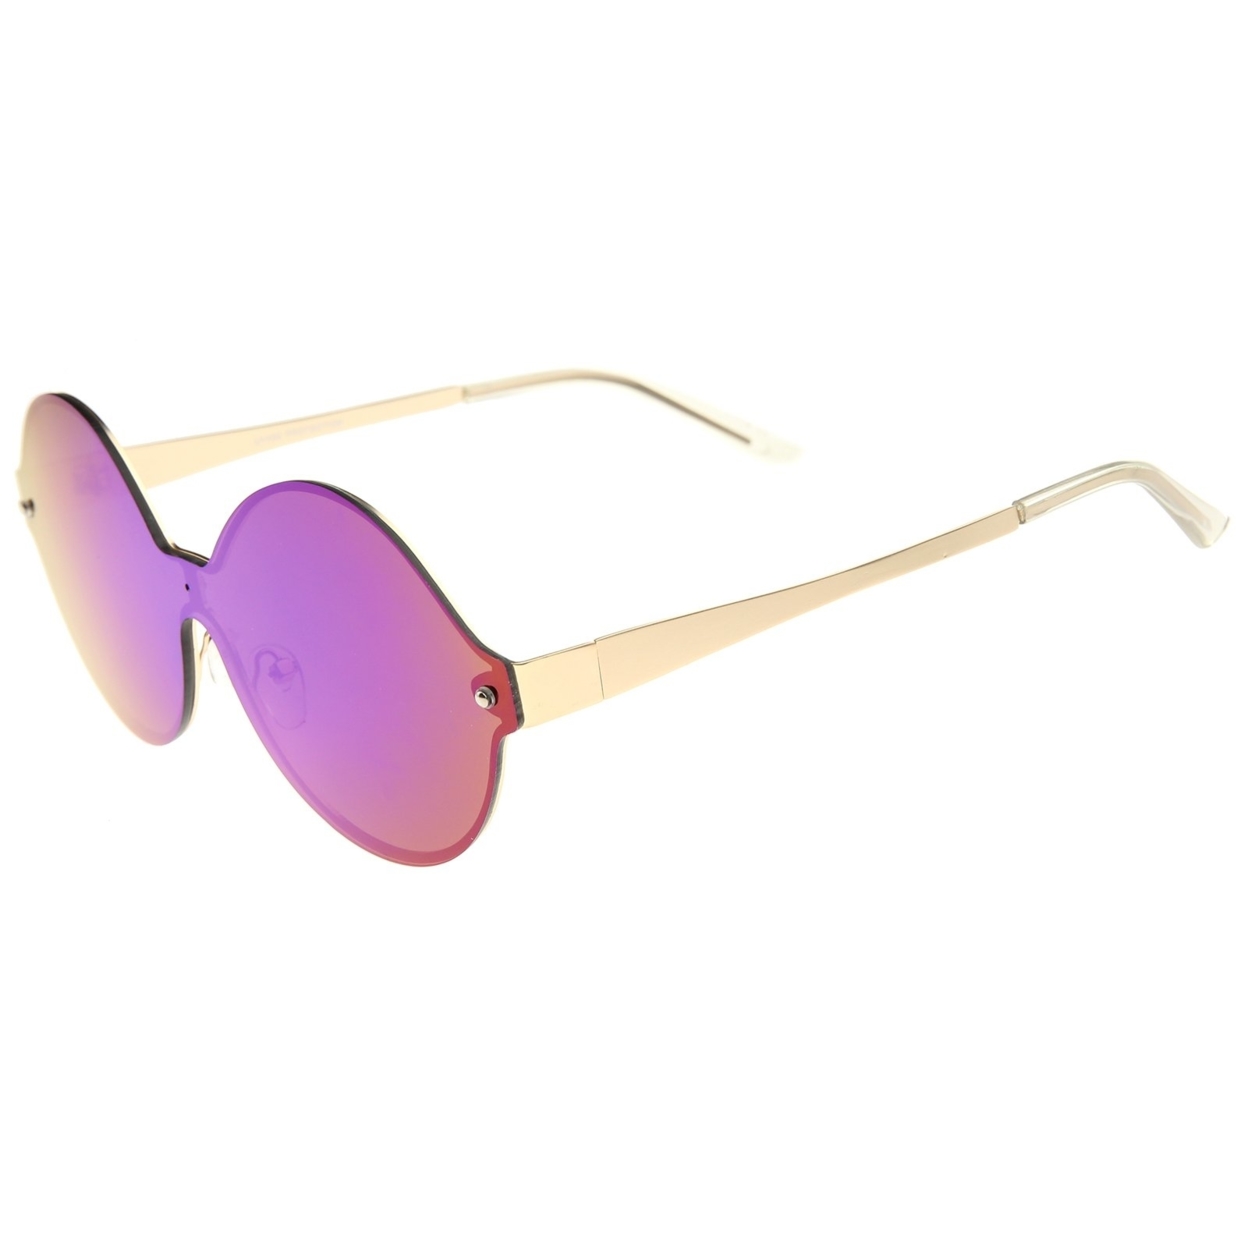 Oversize Round Color Mirror Shield Lens Metal Temple Rimless Sunglasses 69mm - Gold / Gold Mirror